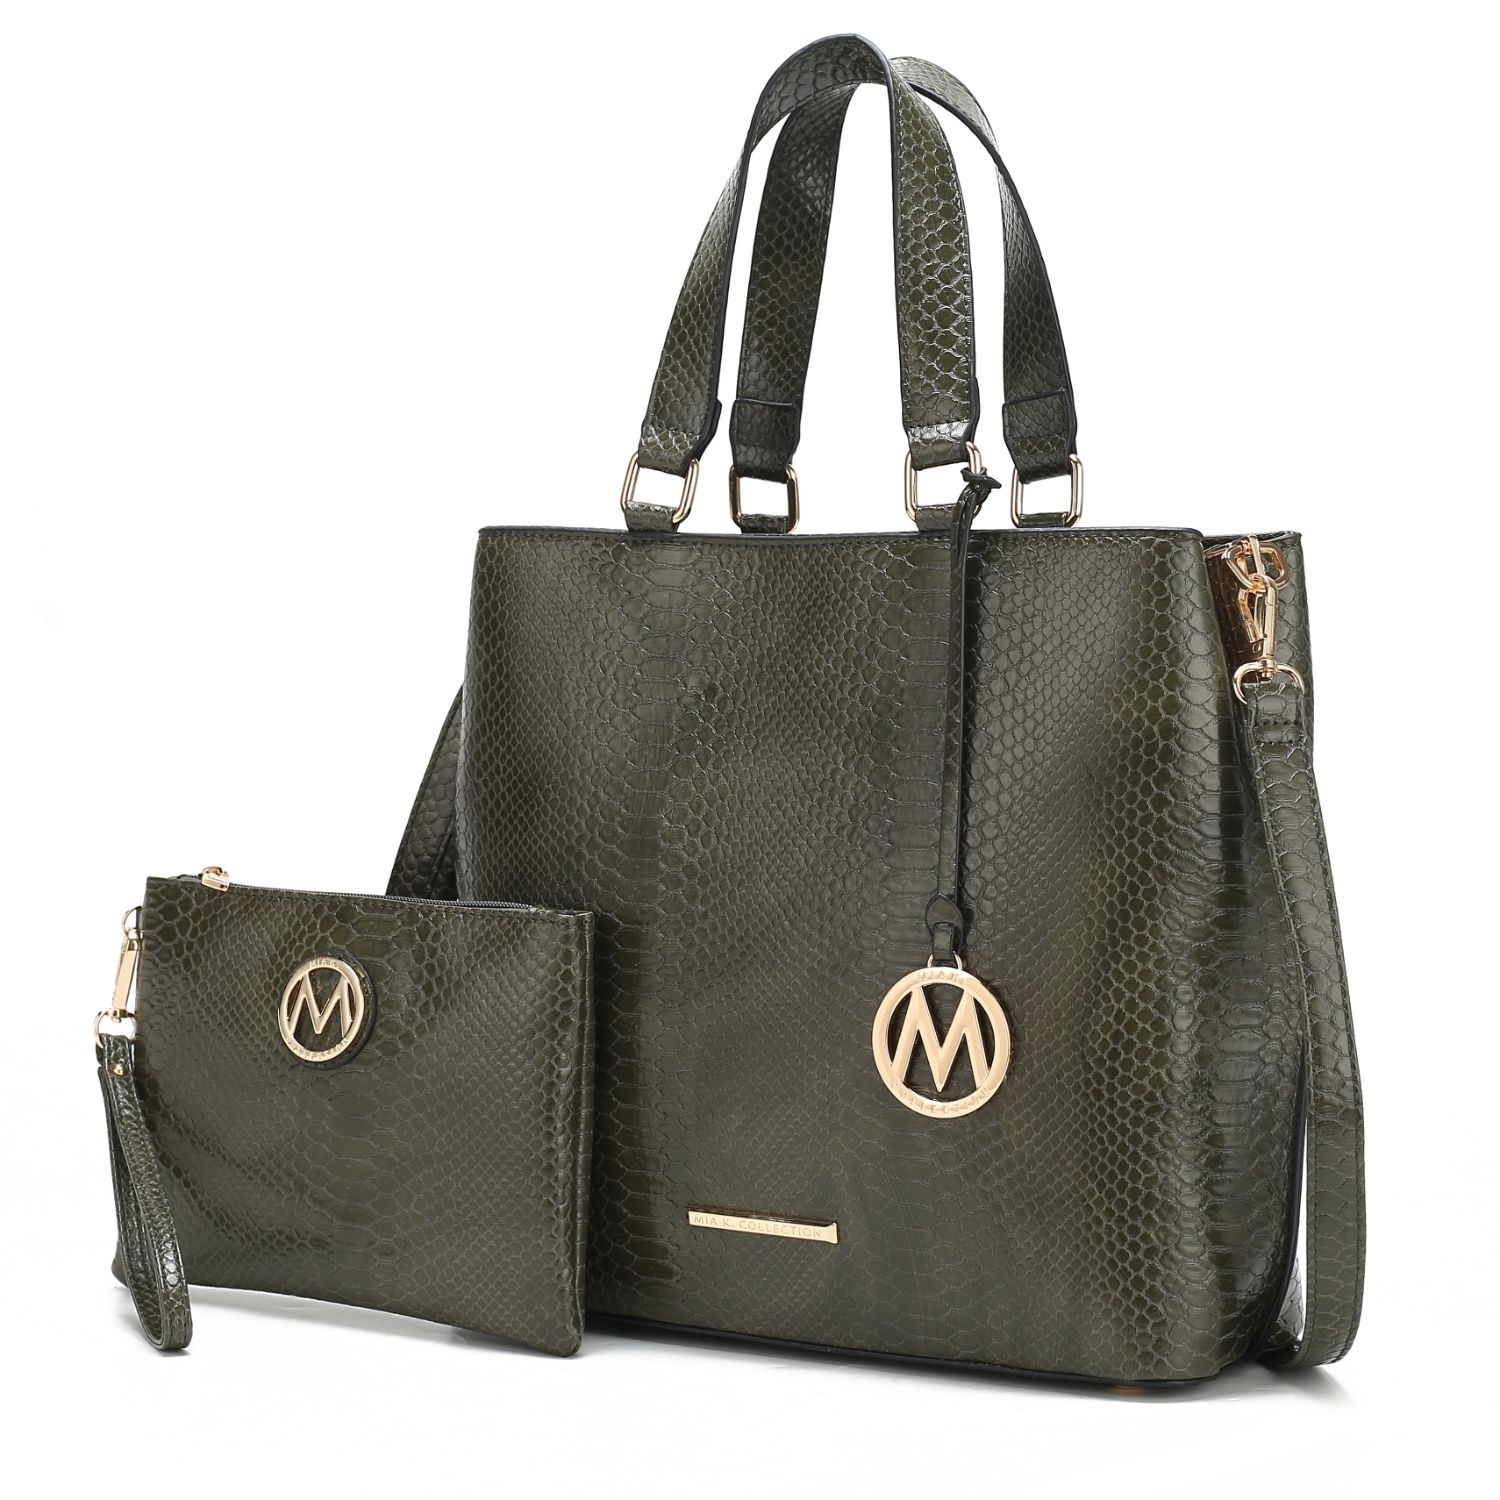 MKF Collection Beryl Snake-embossed Vegan Leather Women's Tote Handbag With Wristlet - 2 Pieces, By Mia K - Taupe